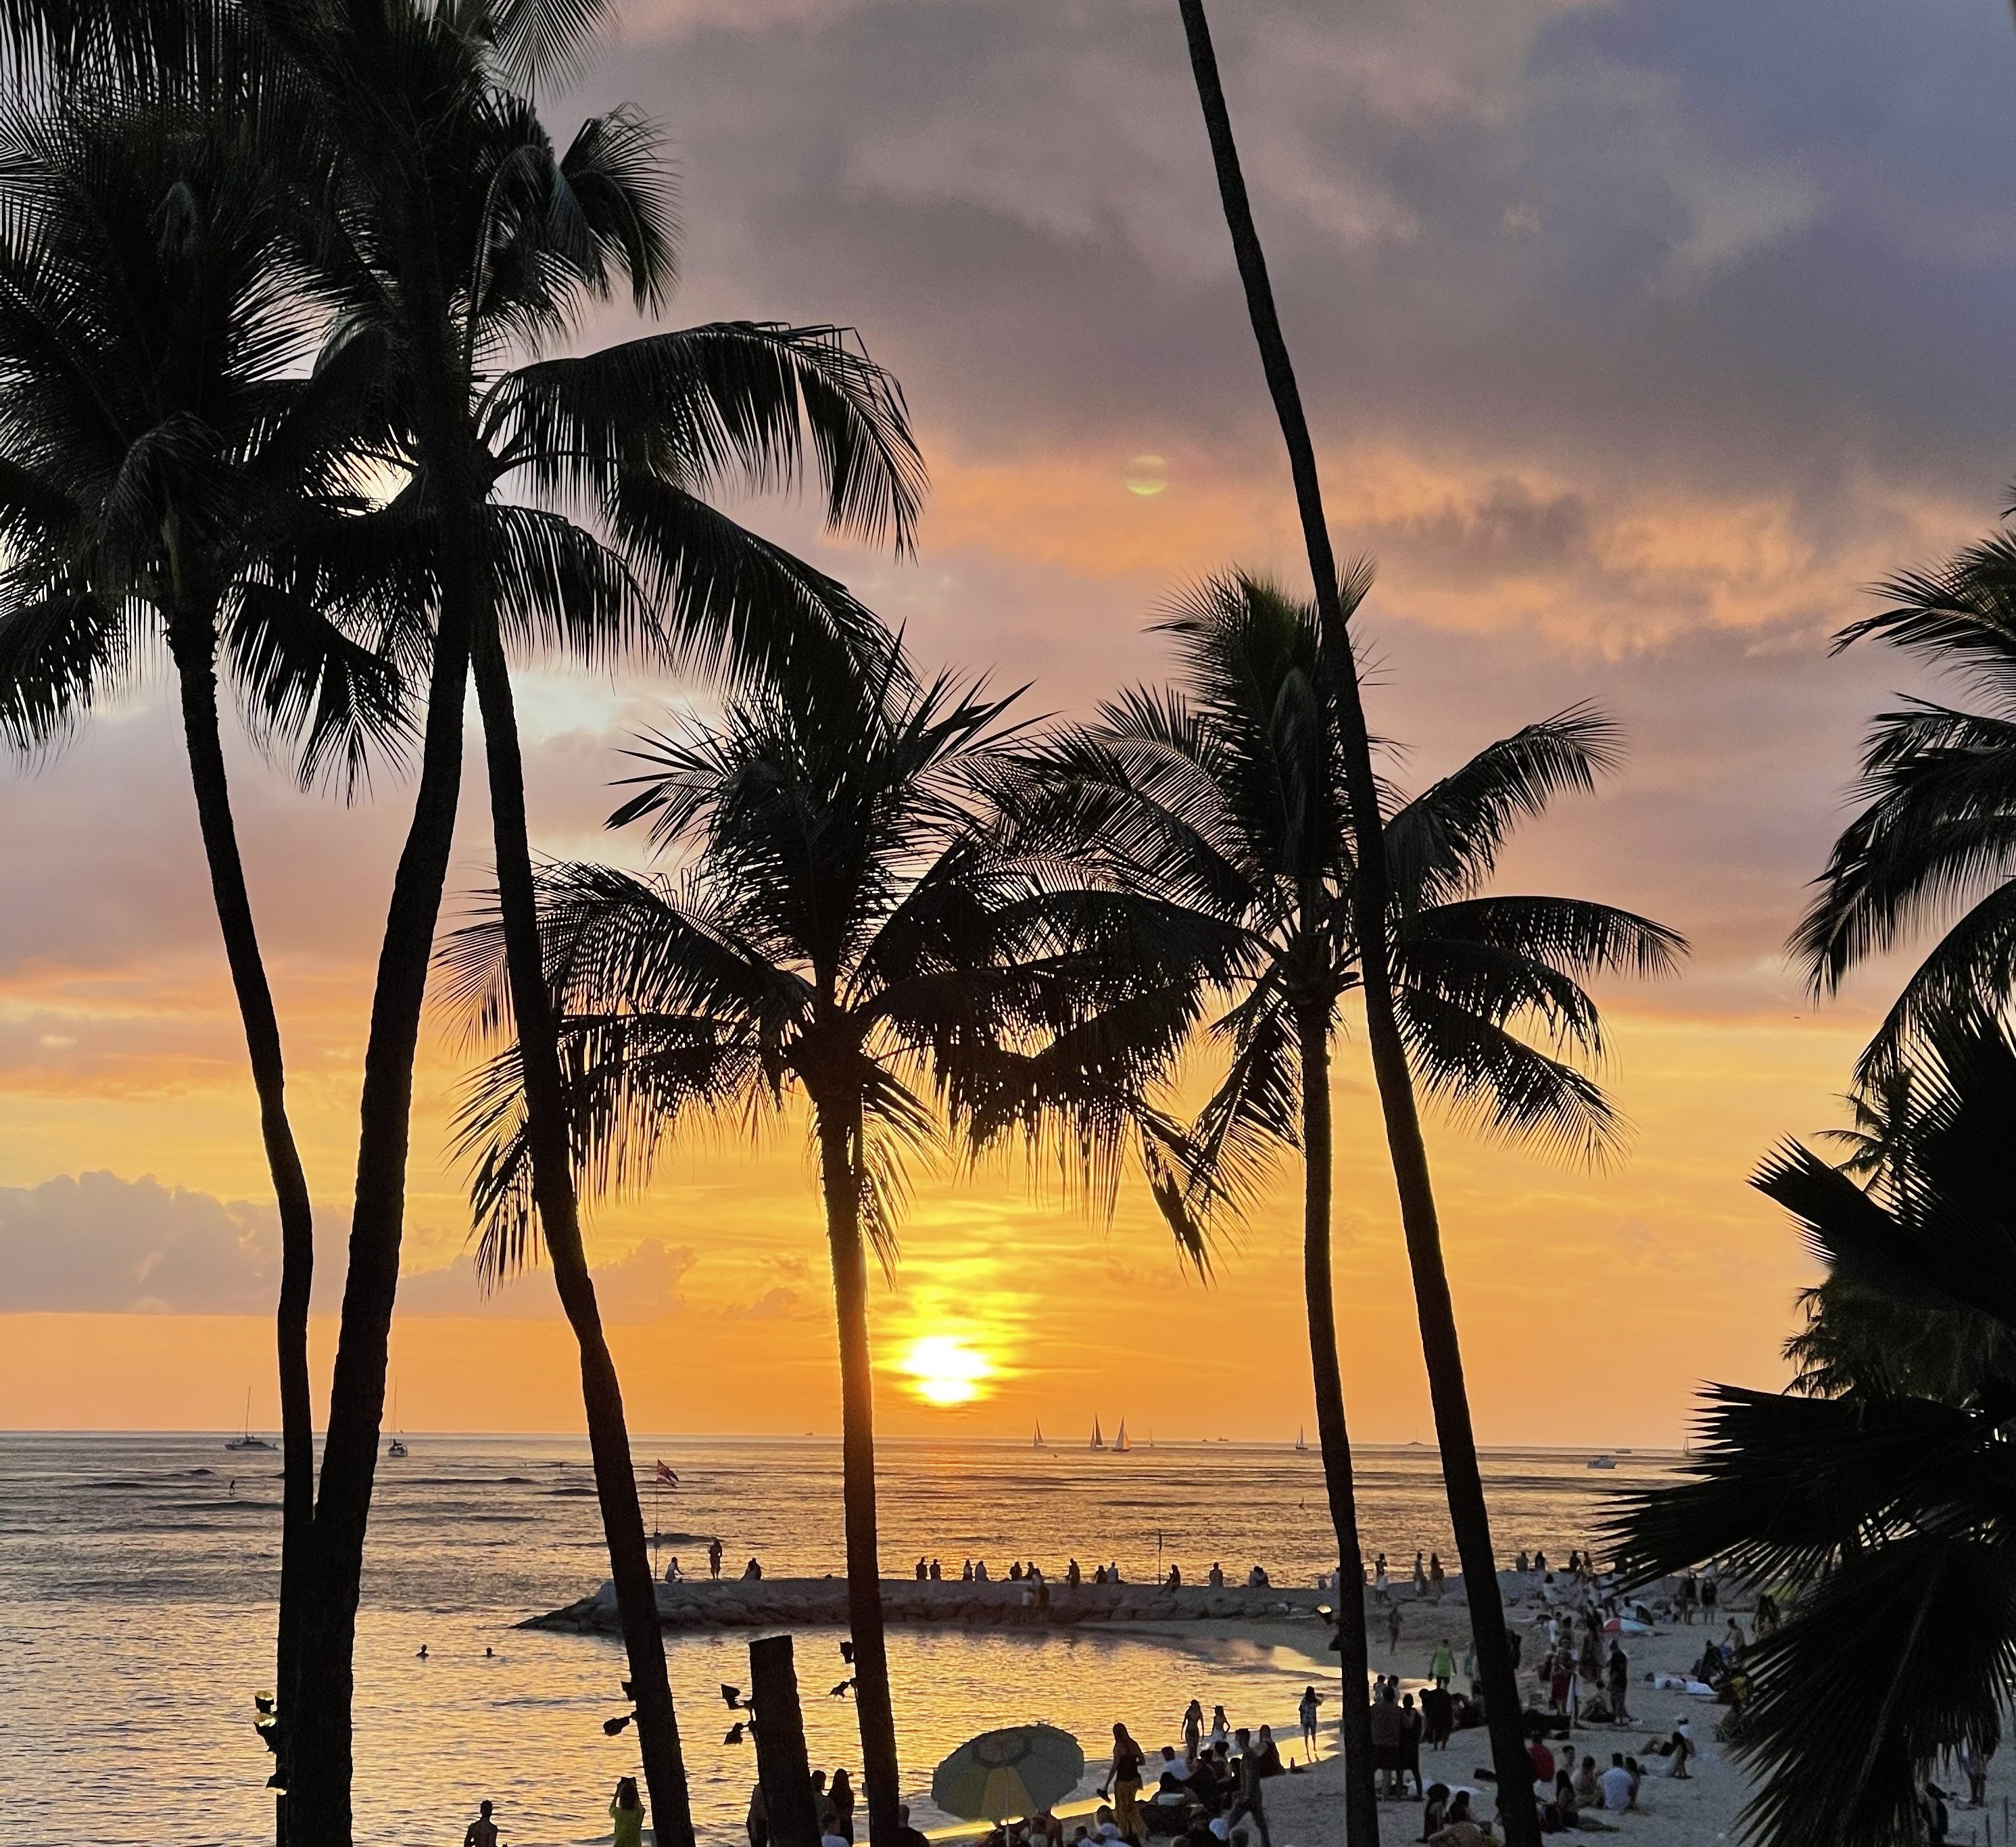 The setting sun gives off a bright orange hue along Waikiki, with palm trees seen in the forefront.